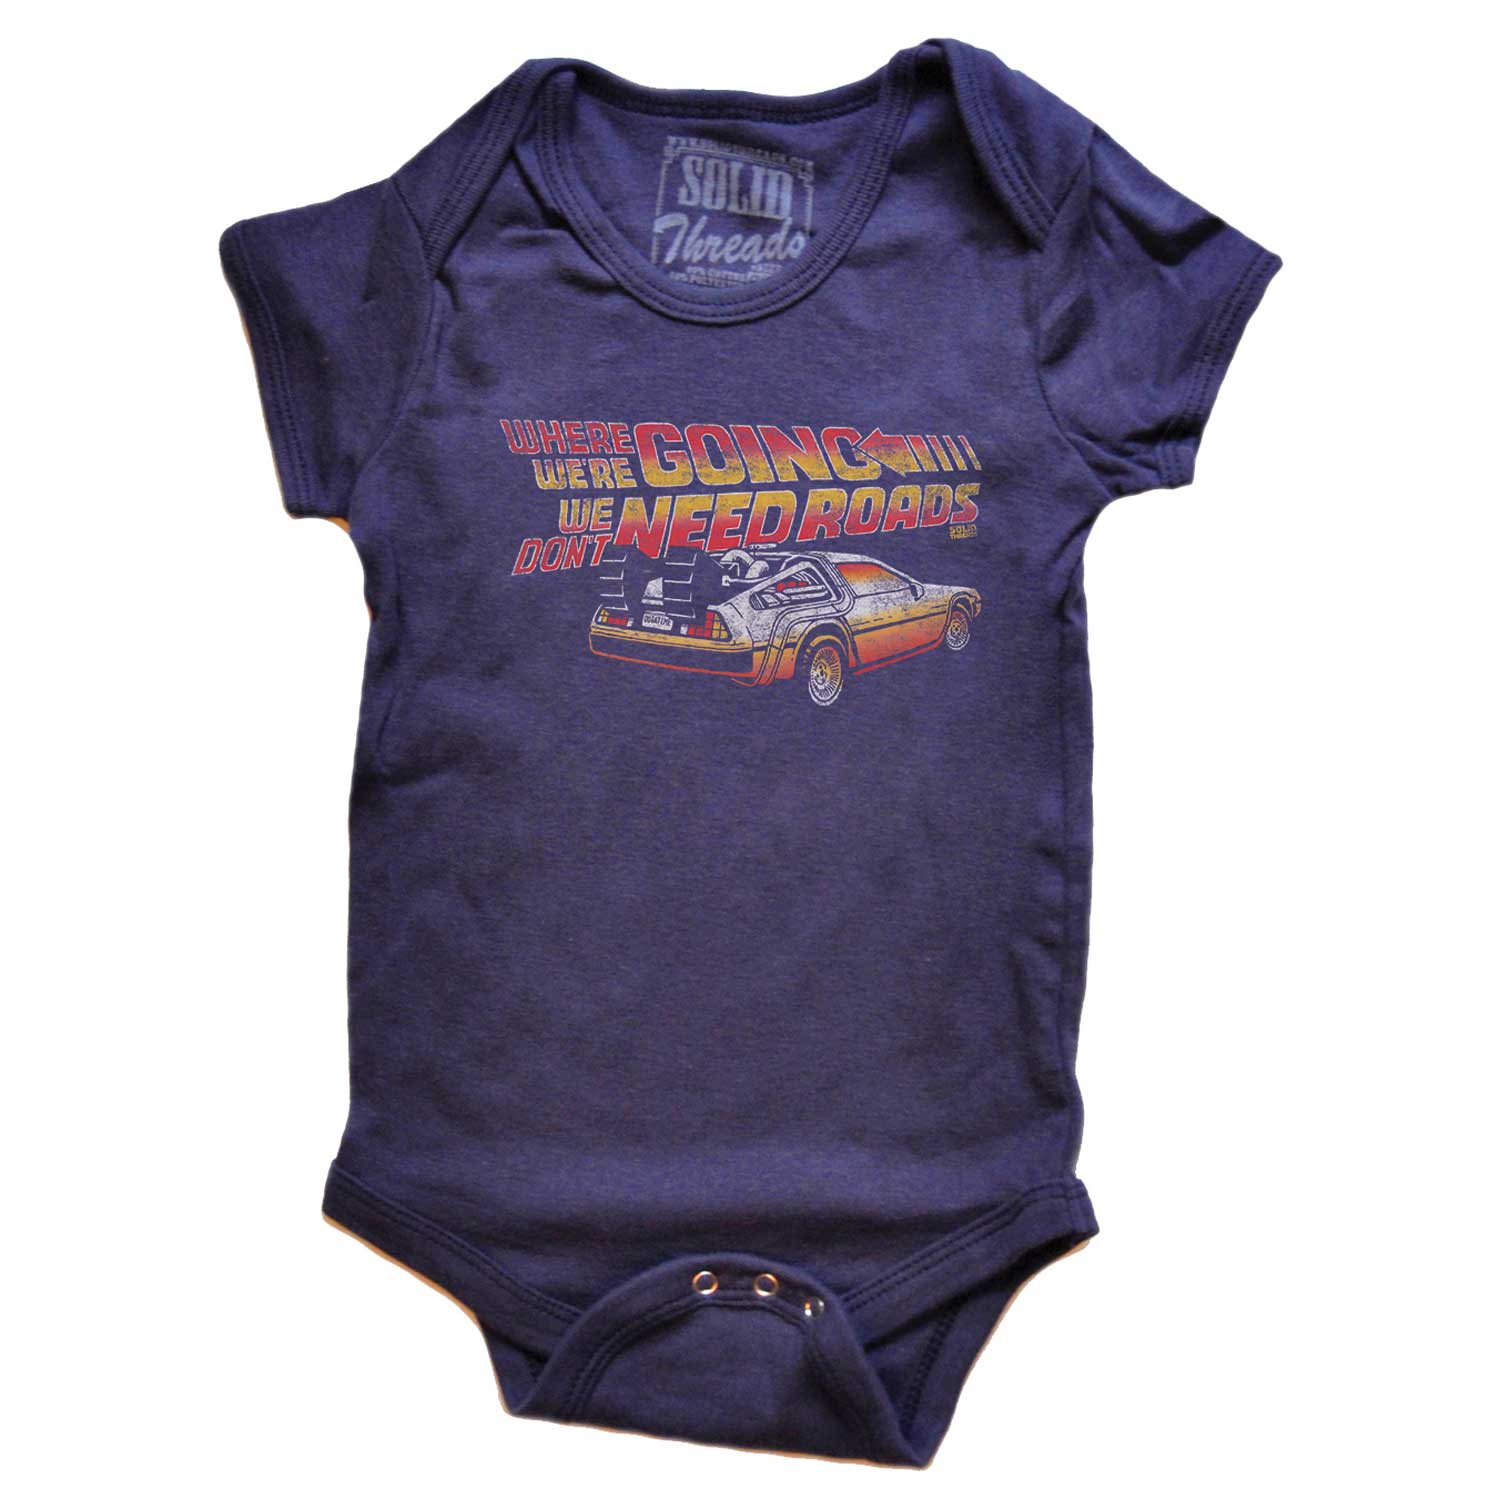 Baby Need Roads Retro 80s Graphic One Piece | Cute Back to the Future Baby Romper | Solid Threads